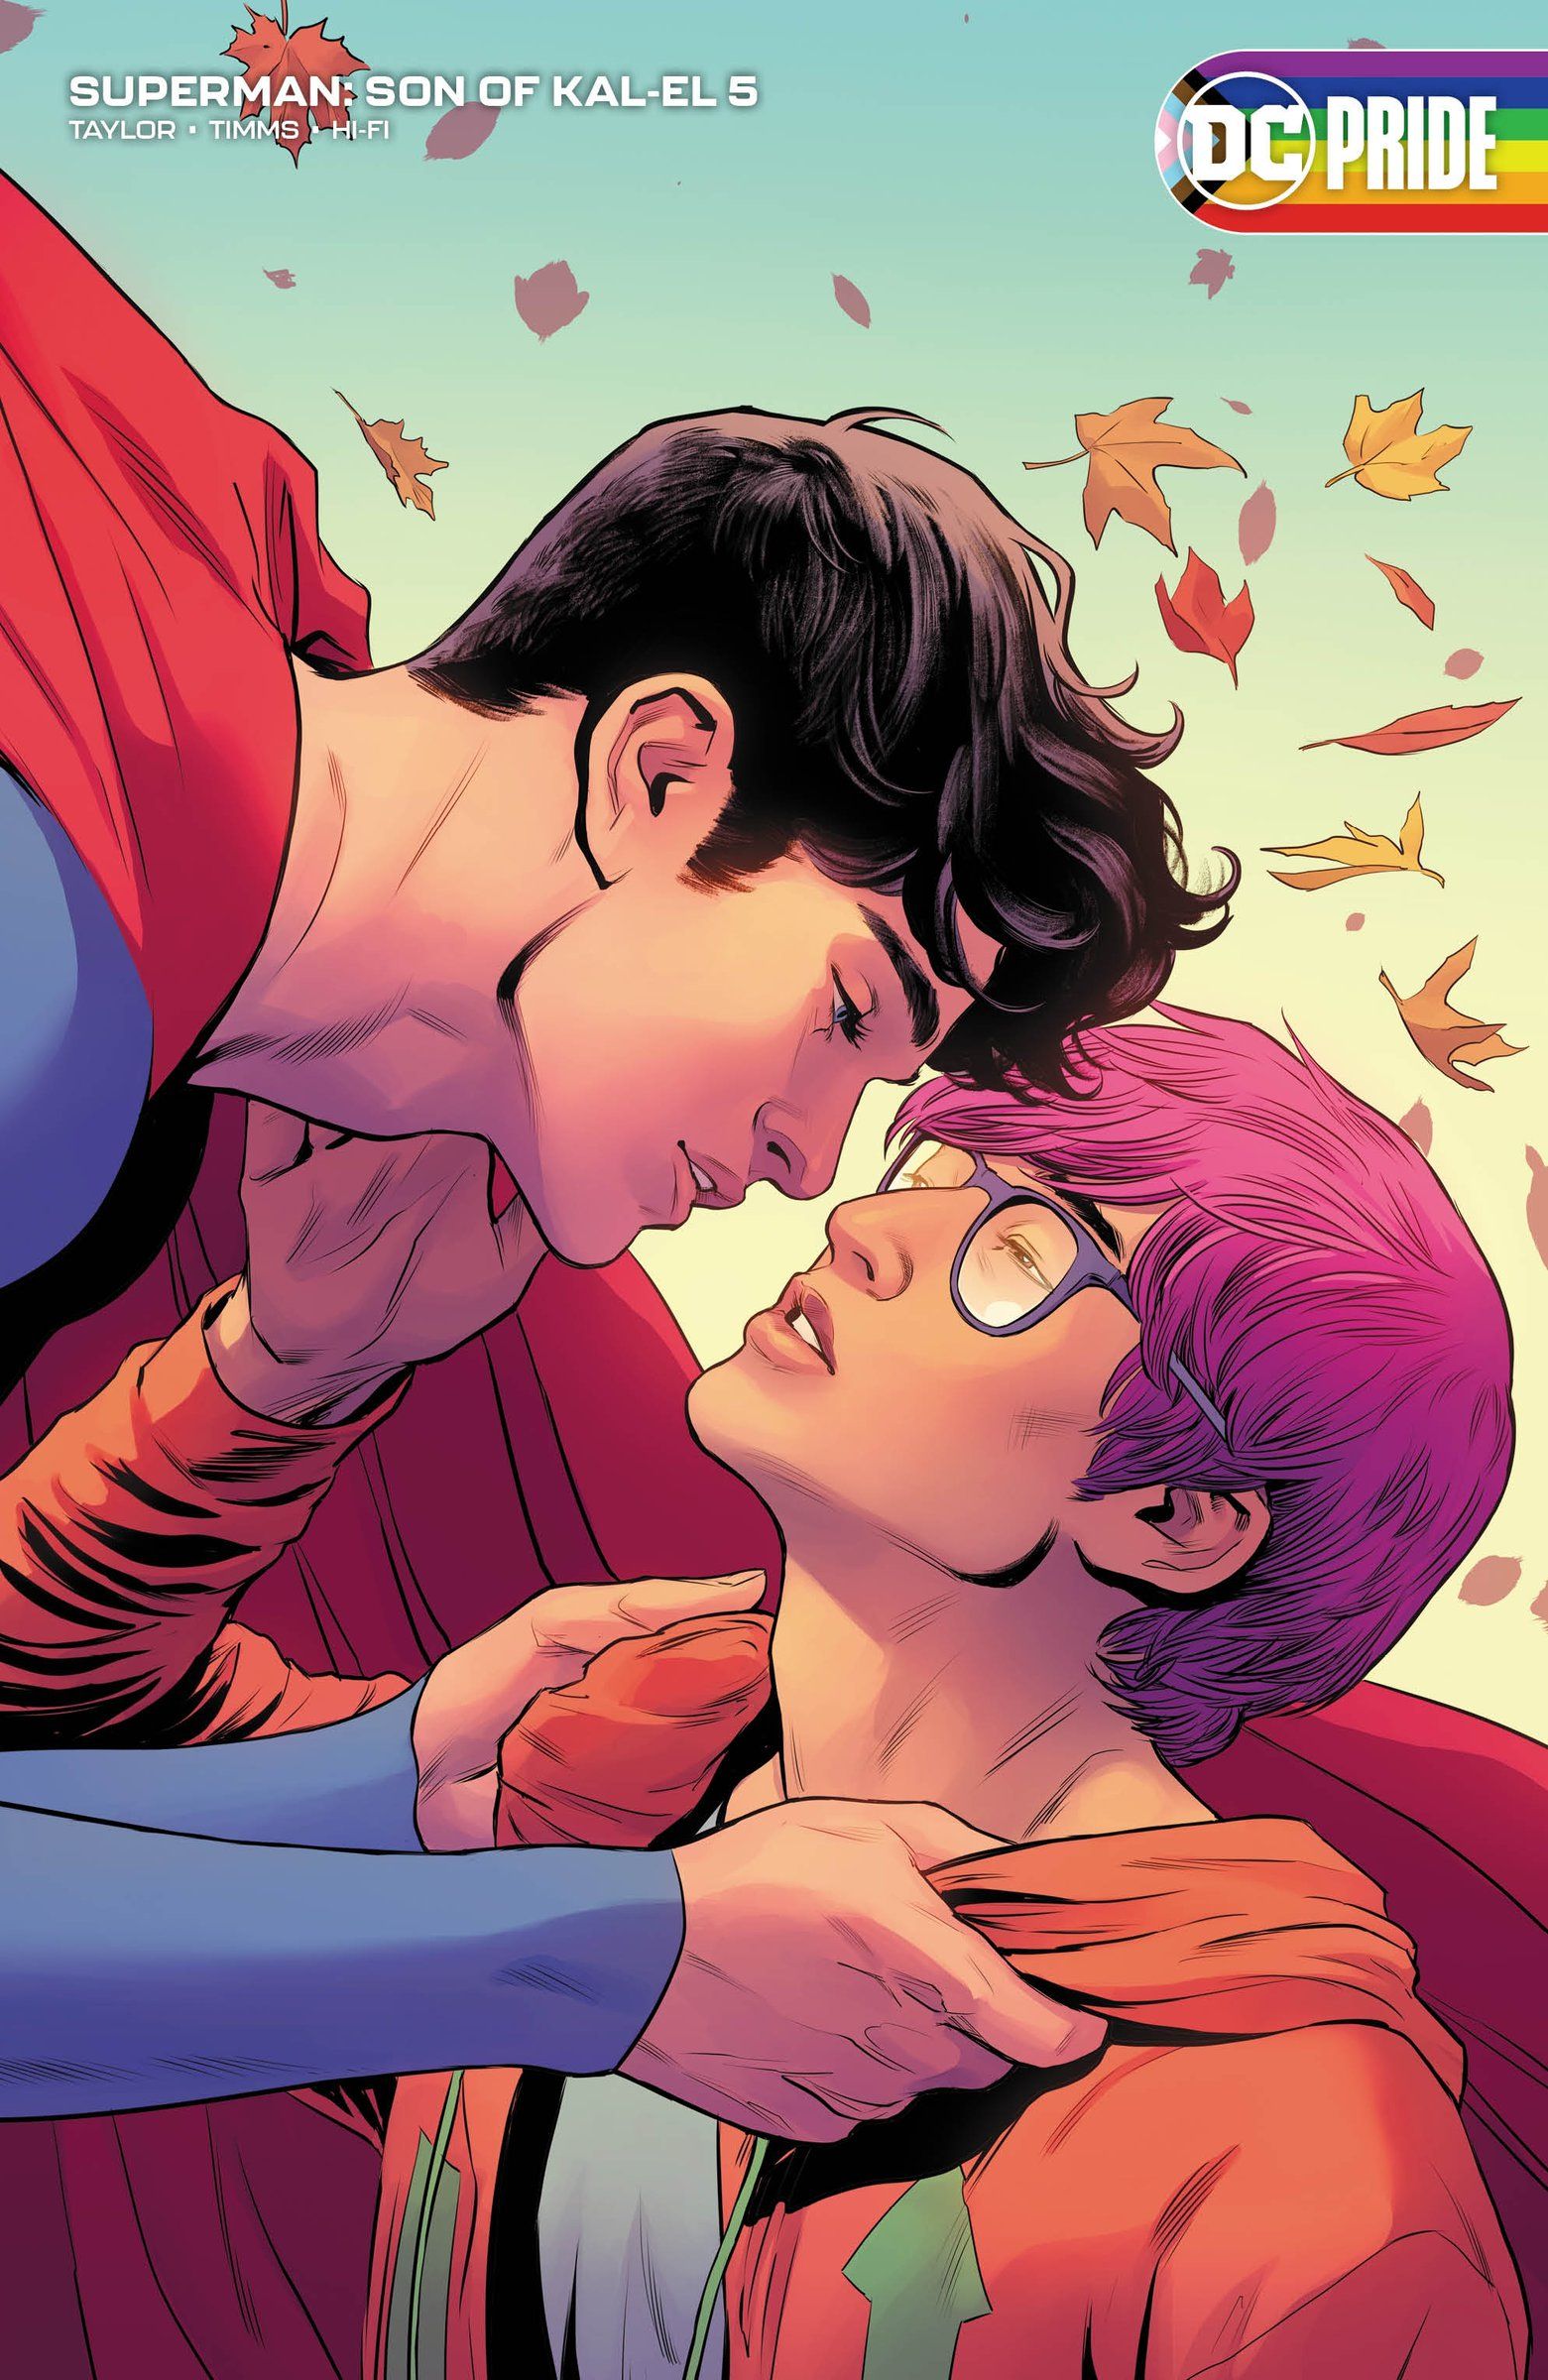 From Supermans bisexual son to Harley Quinn and Poison Ivy, LGBTQ+ representation is increasing in mainstream comics The Seattle Times